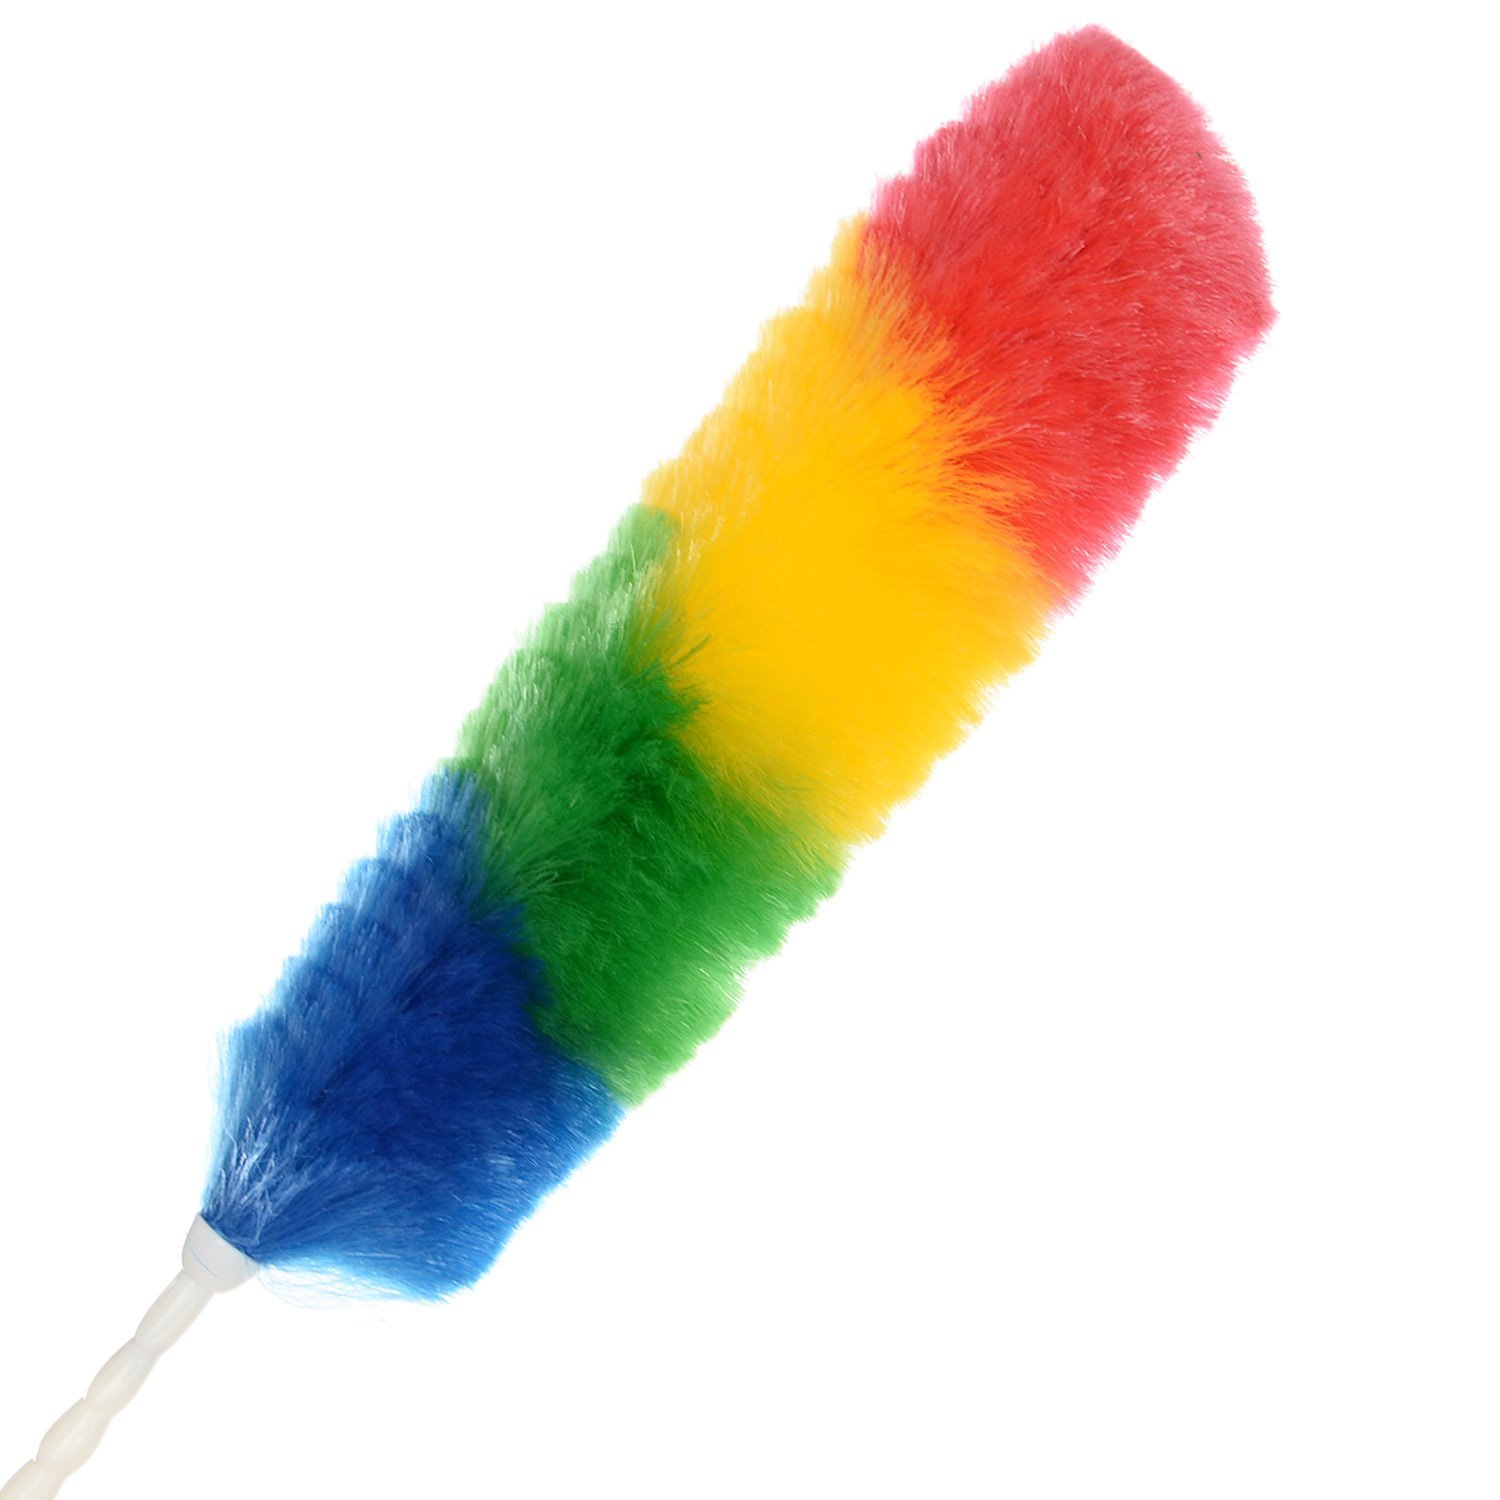 HOMEMAID DUSTER FEATHER